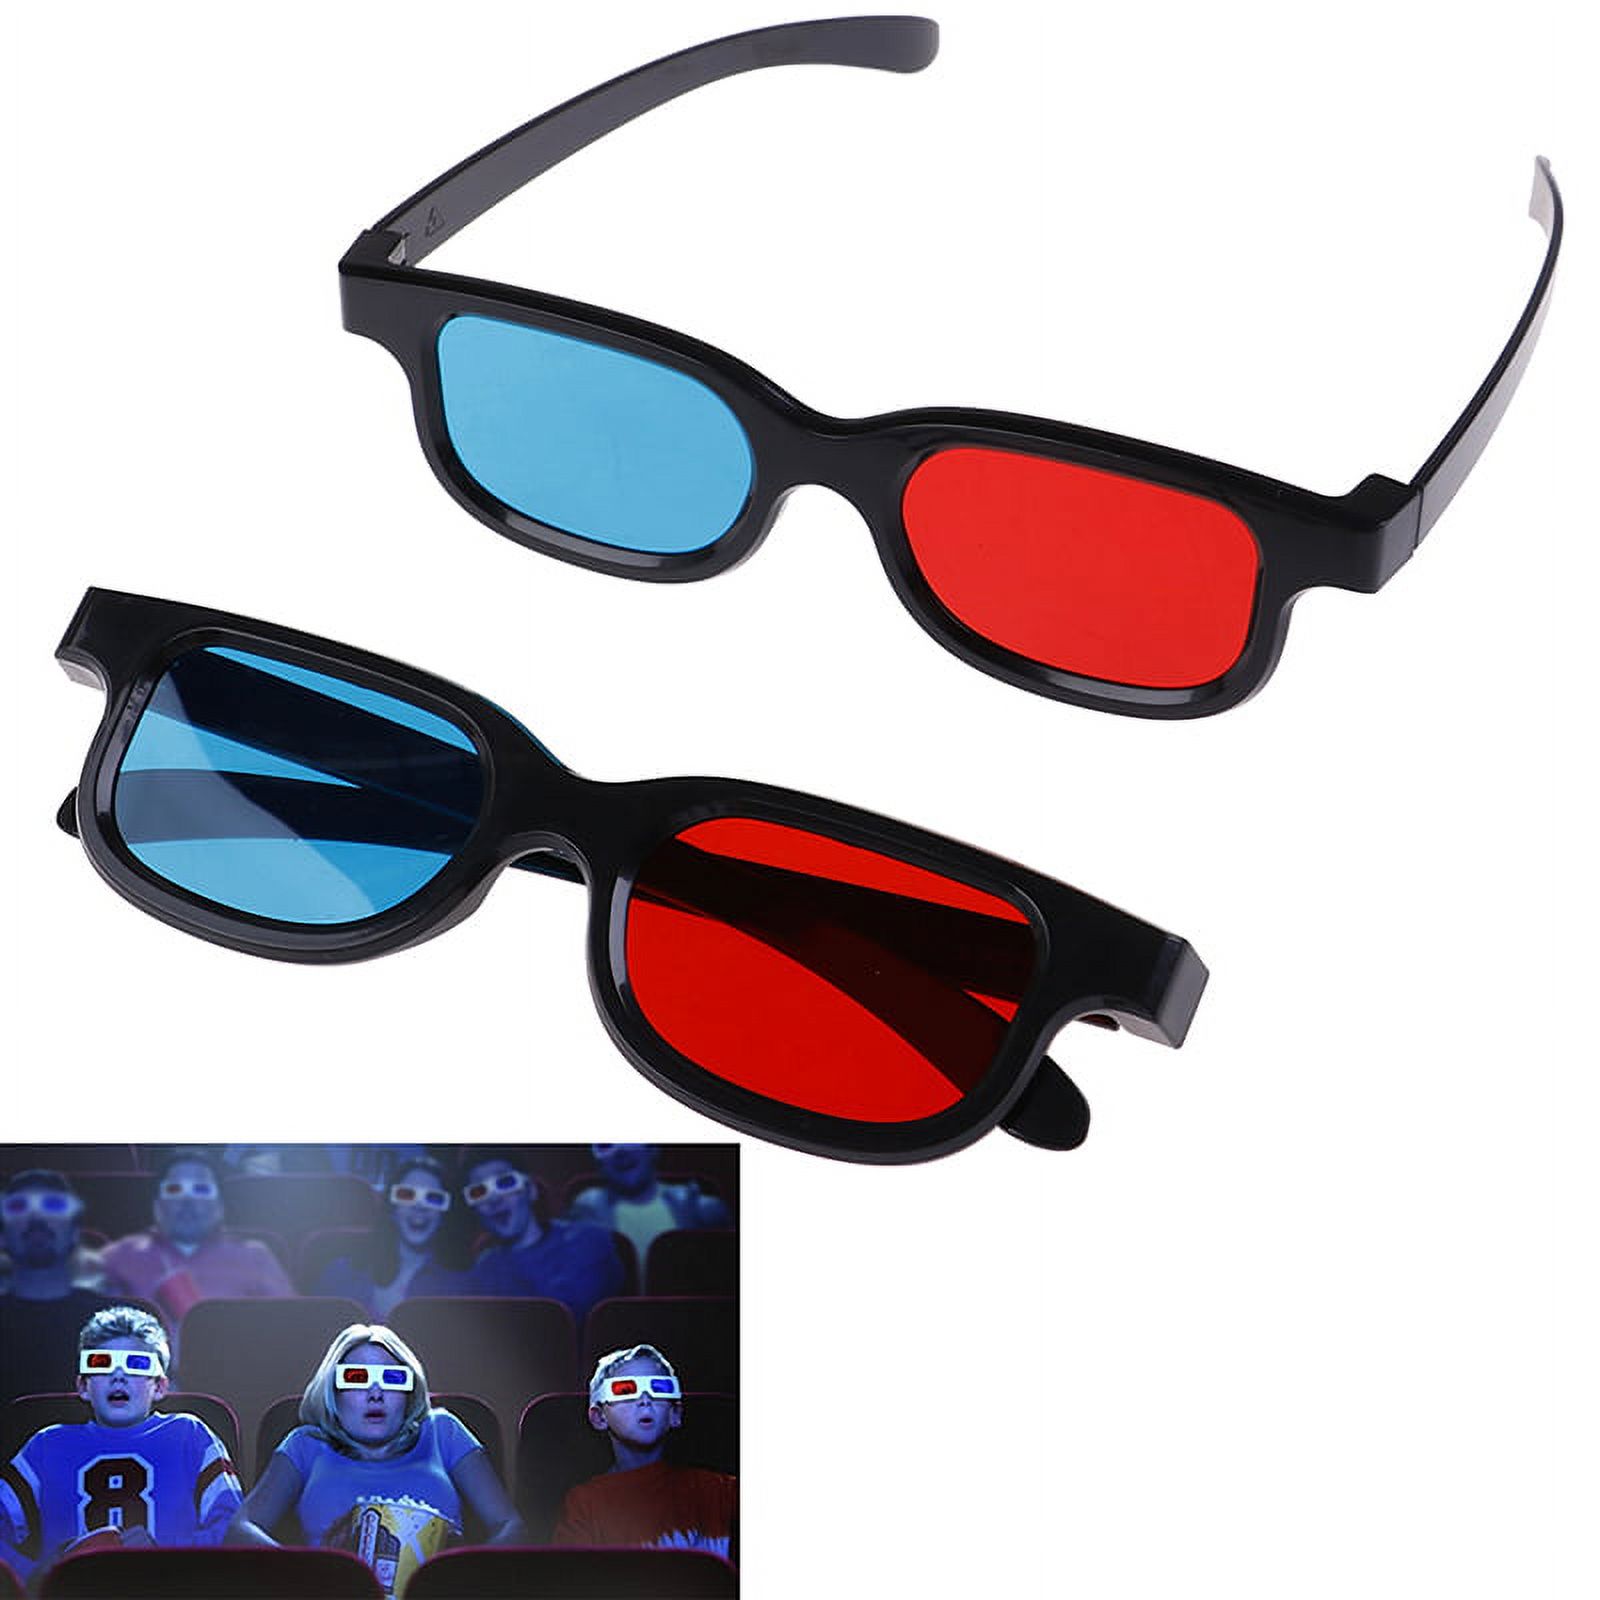 Universal red blue 3d glasses for dimensional anaglyph movie game - image 3 of 9